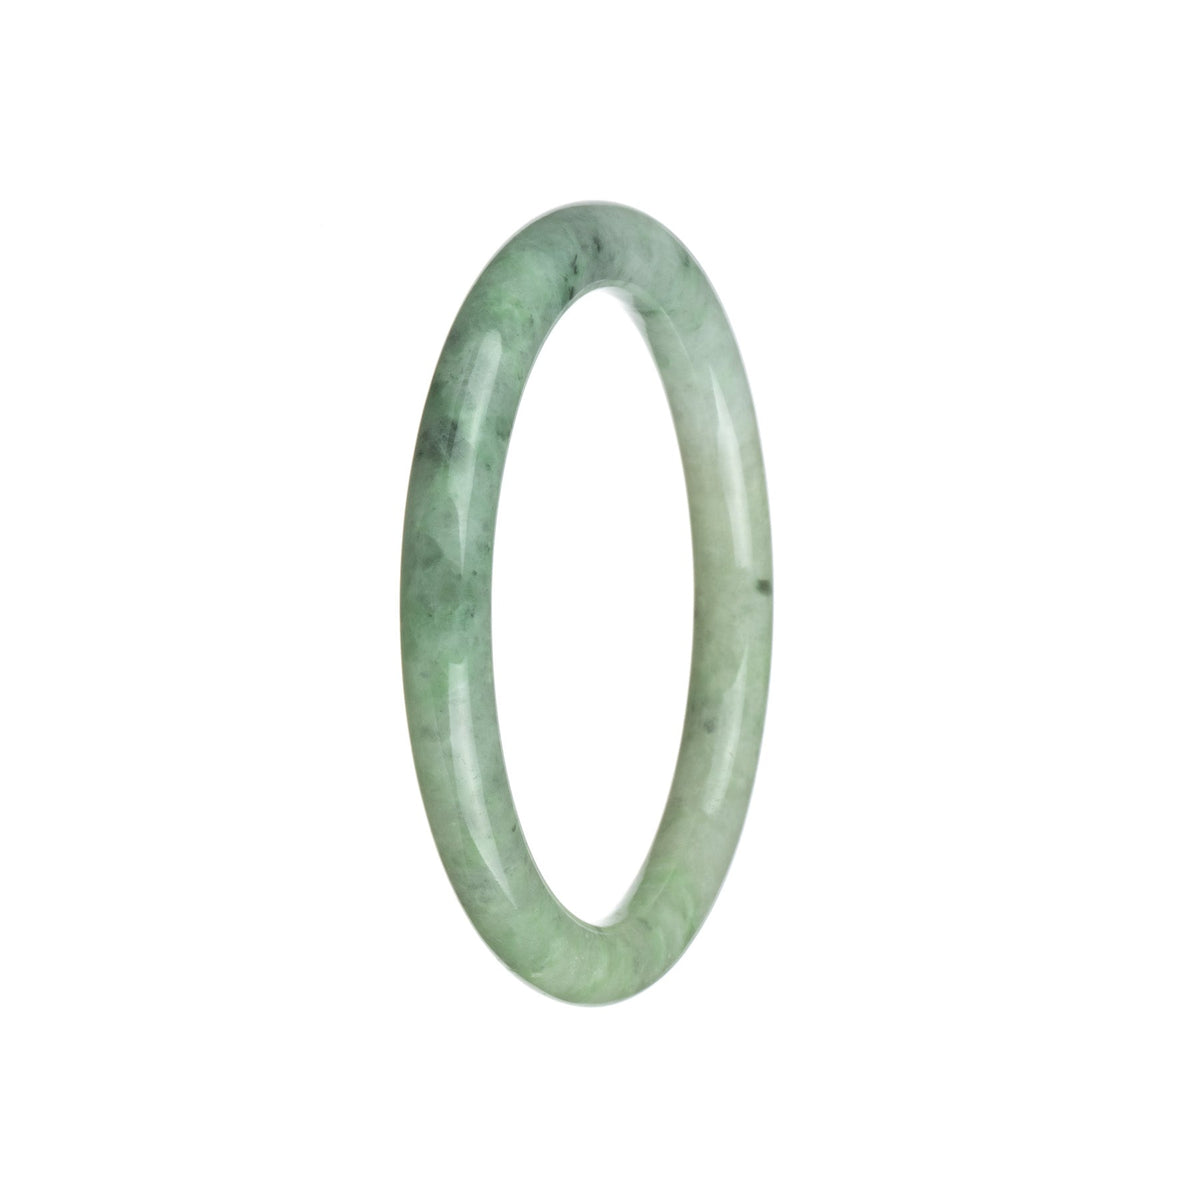 A close-up photo of a beautiful green and white jade bangle bracelet with a petite round shape, made from genuine Grade A Burmese jade. The bracelet is from the MAYS collection.